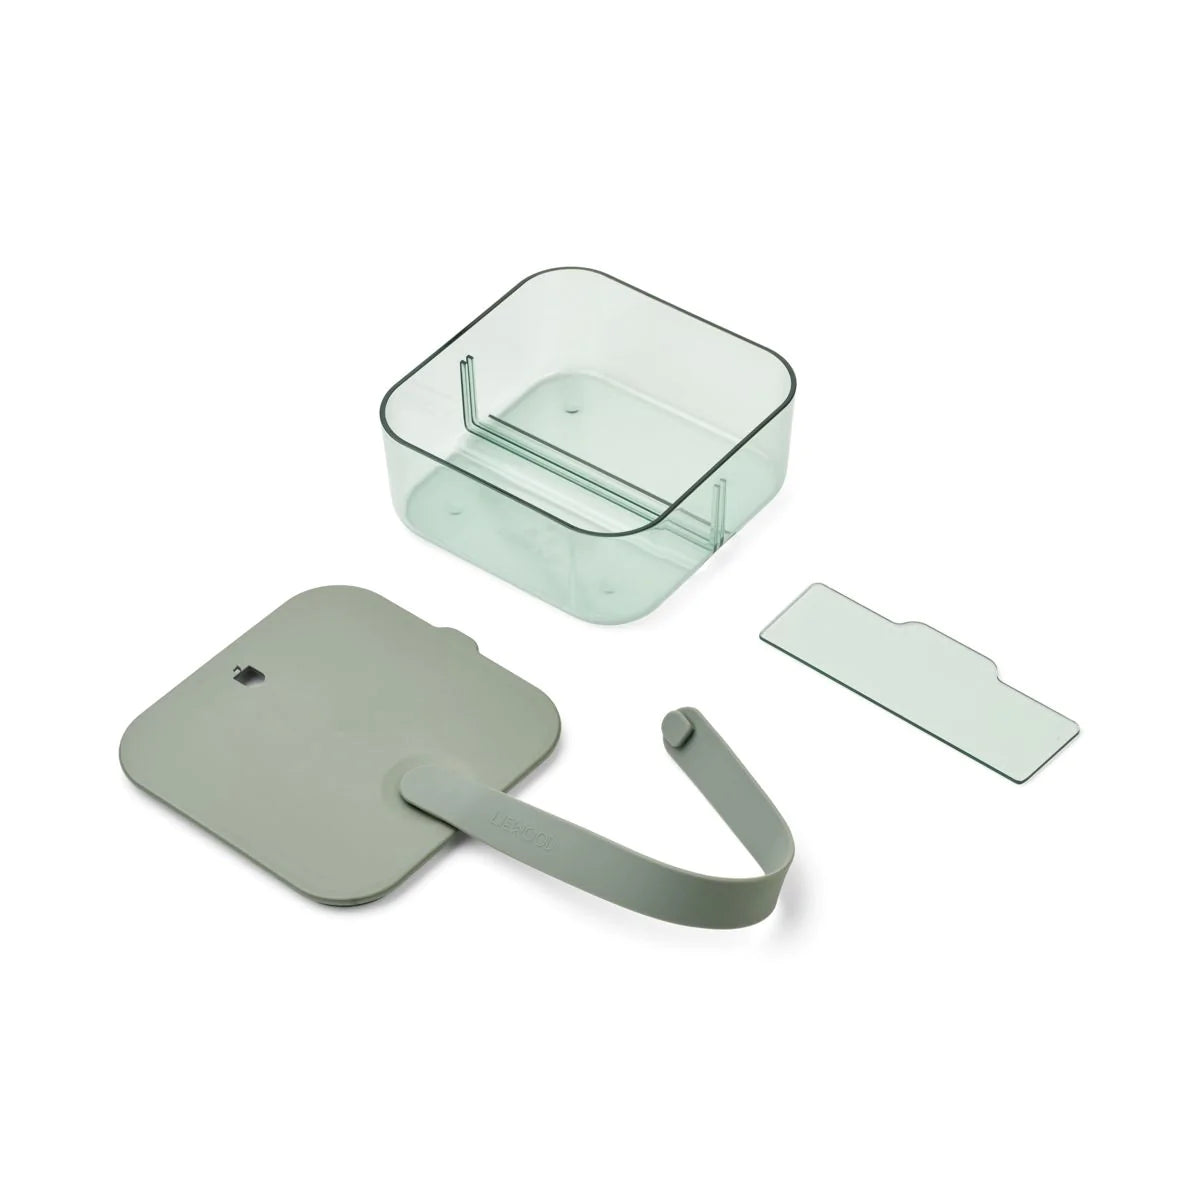 CARIN LUNCH BOX SMALL - FAUNE GREEN PEPPERMINT, LIEWOOD